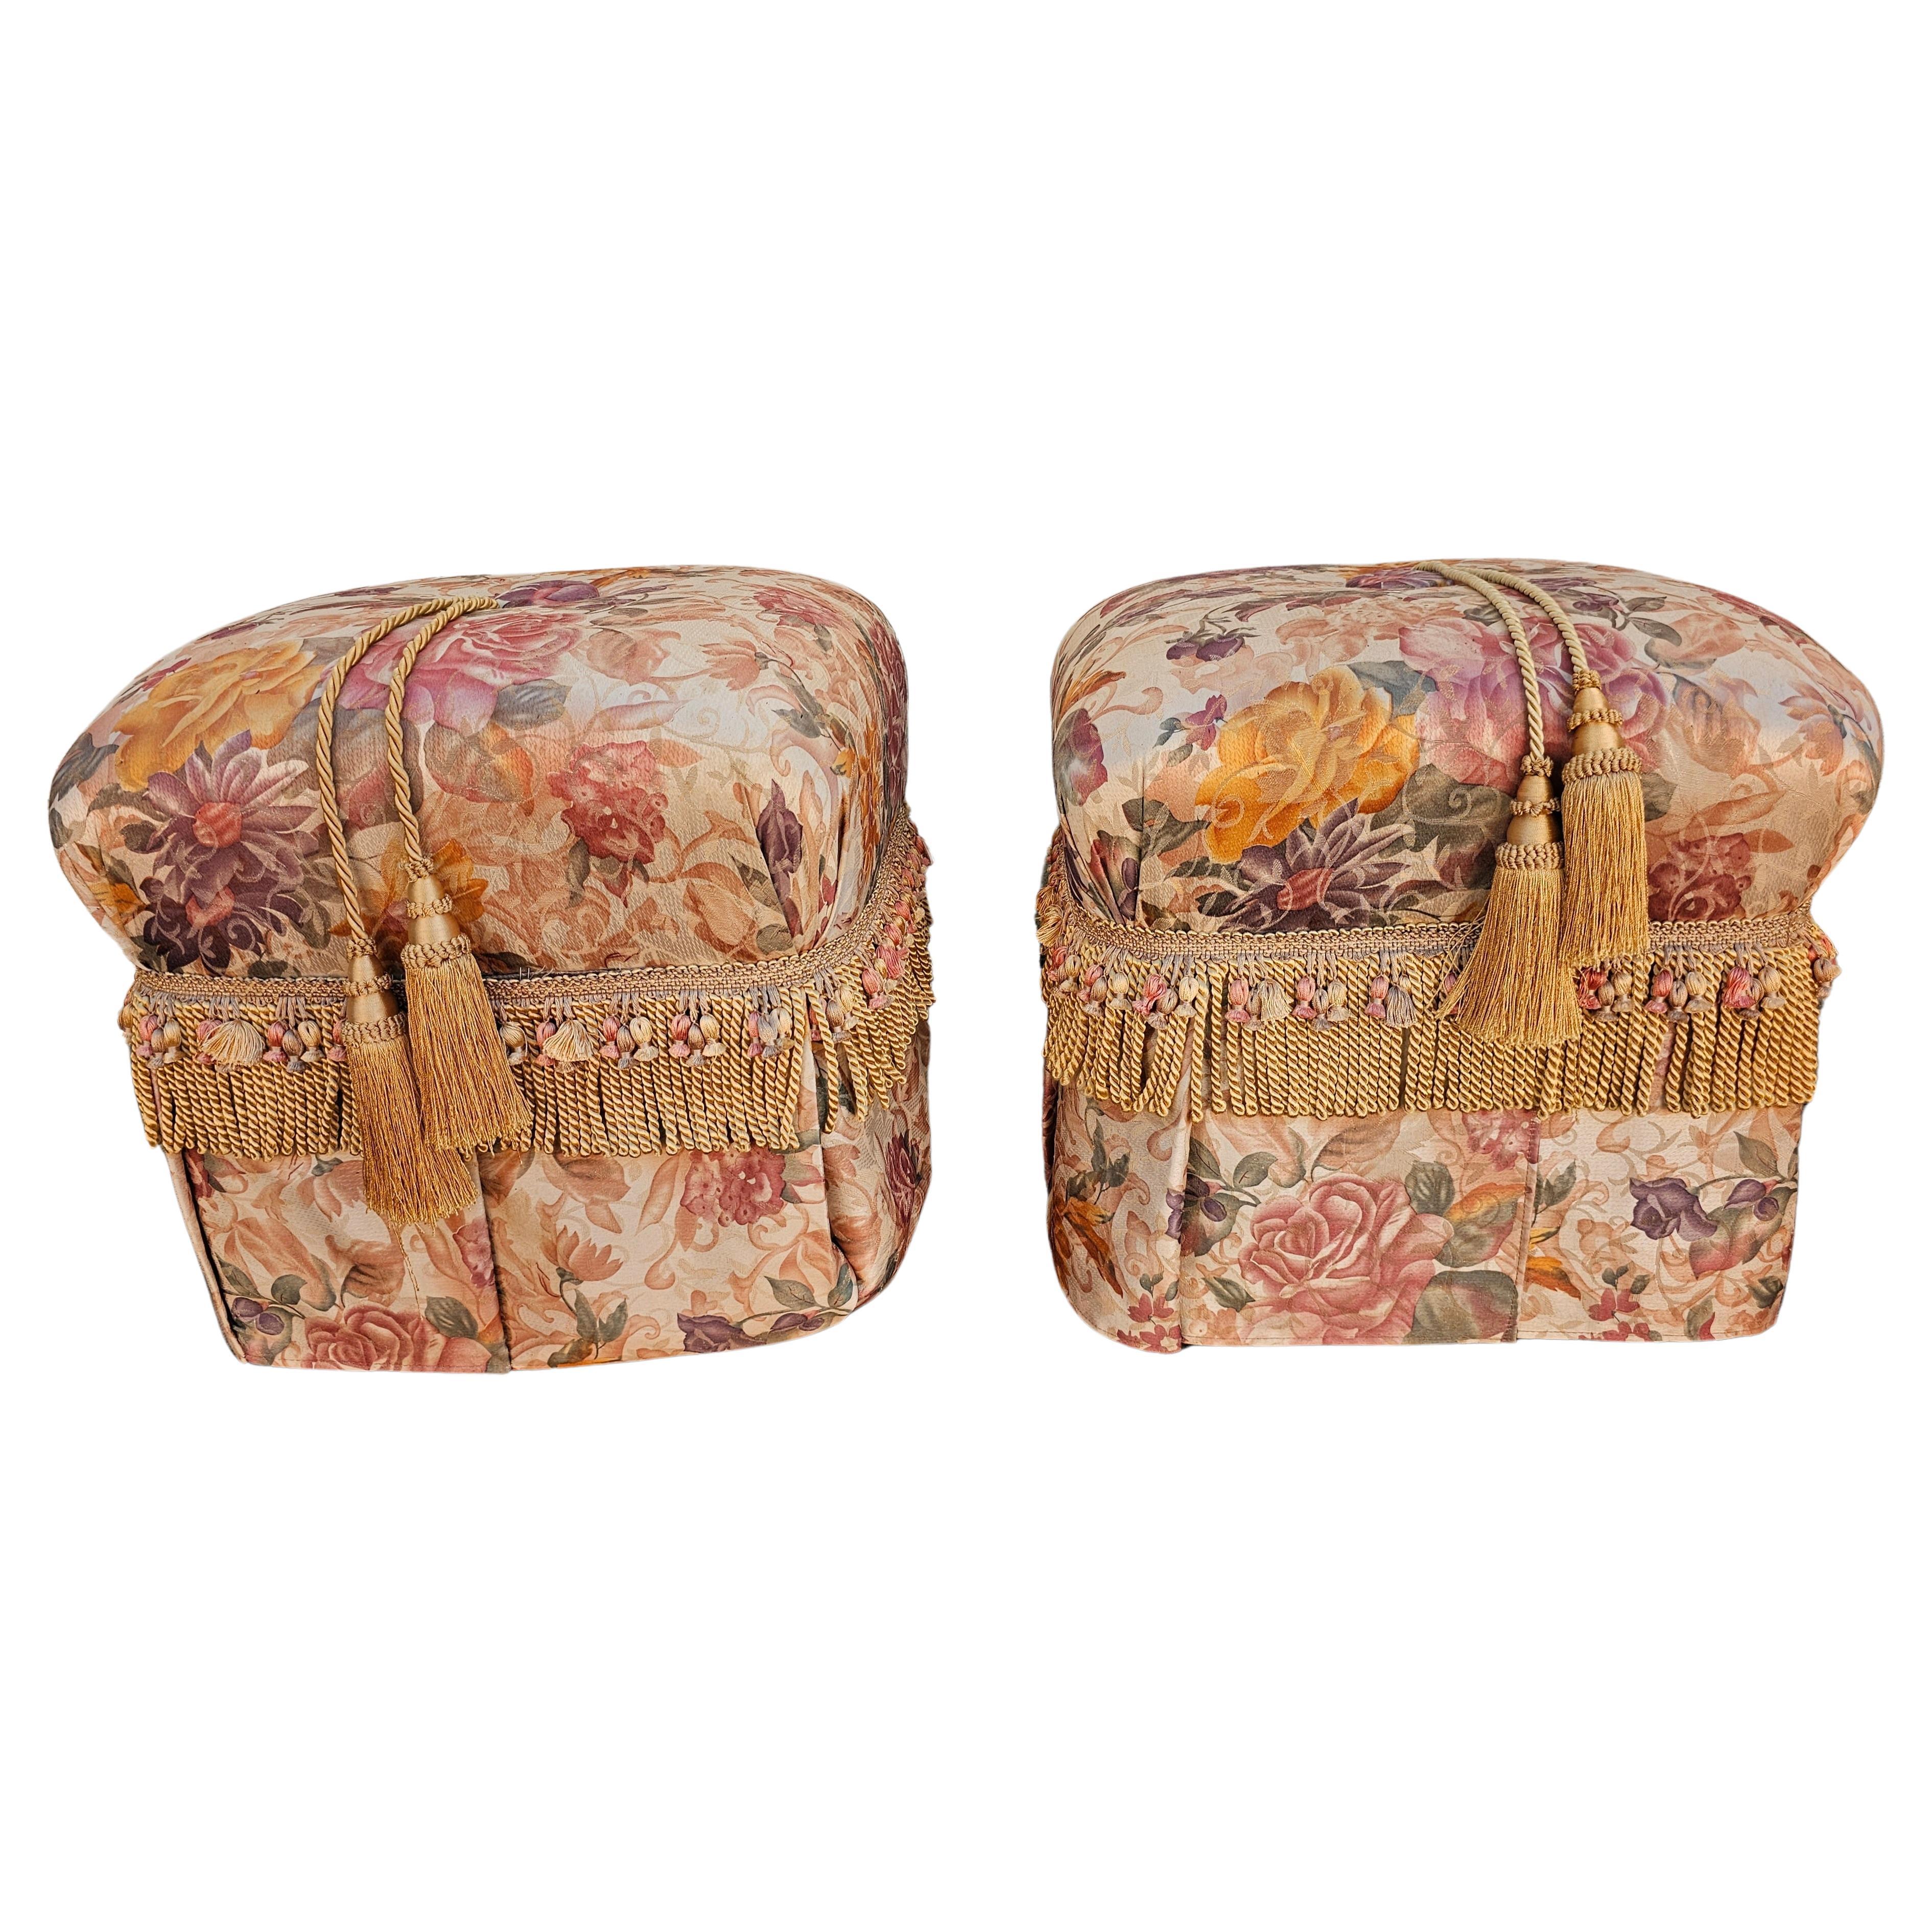 20th Century Modern Upholstered Decorative Footstool Ottomans, Pair For Sale 5